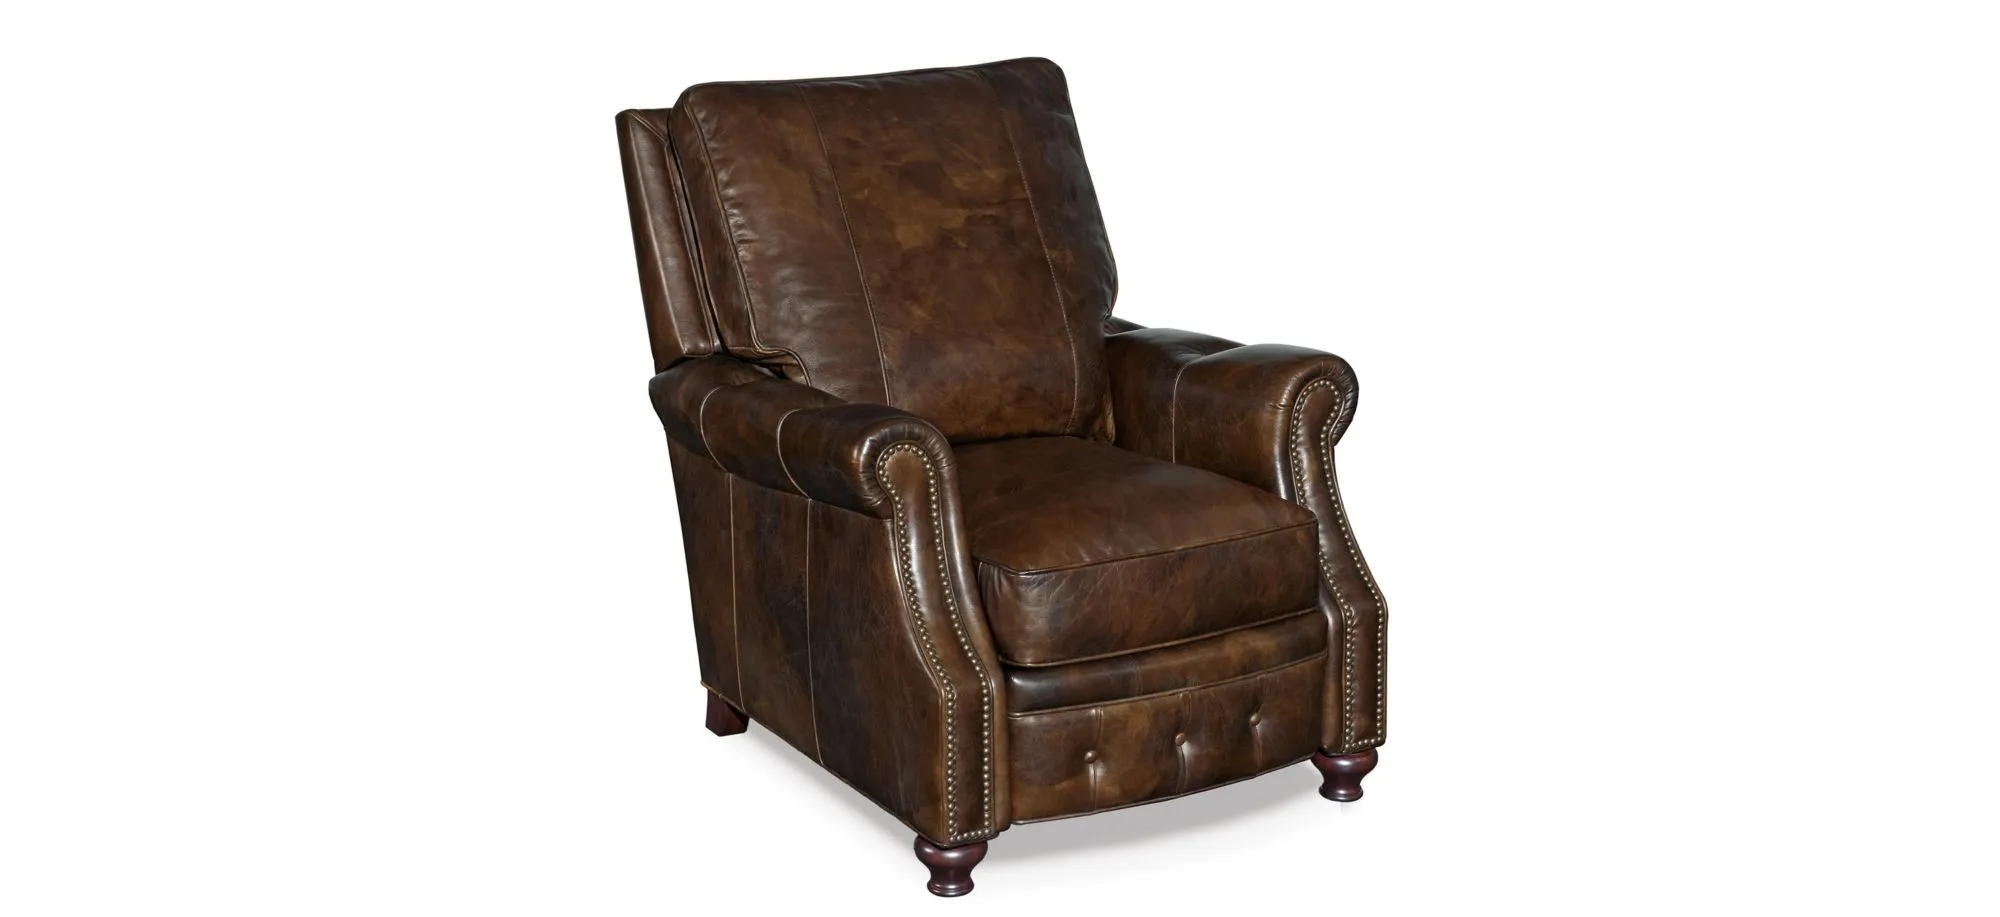 Winslow Recliner in Brown by Hooker Furniture